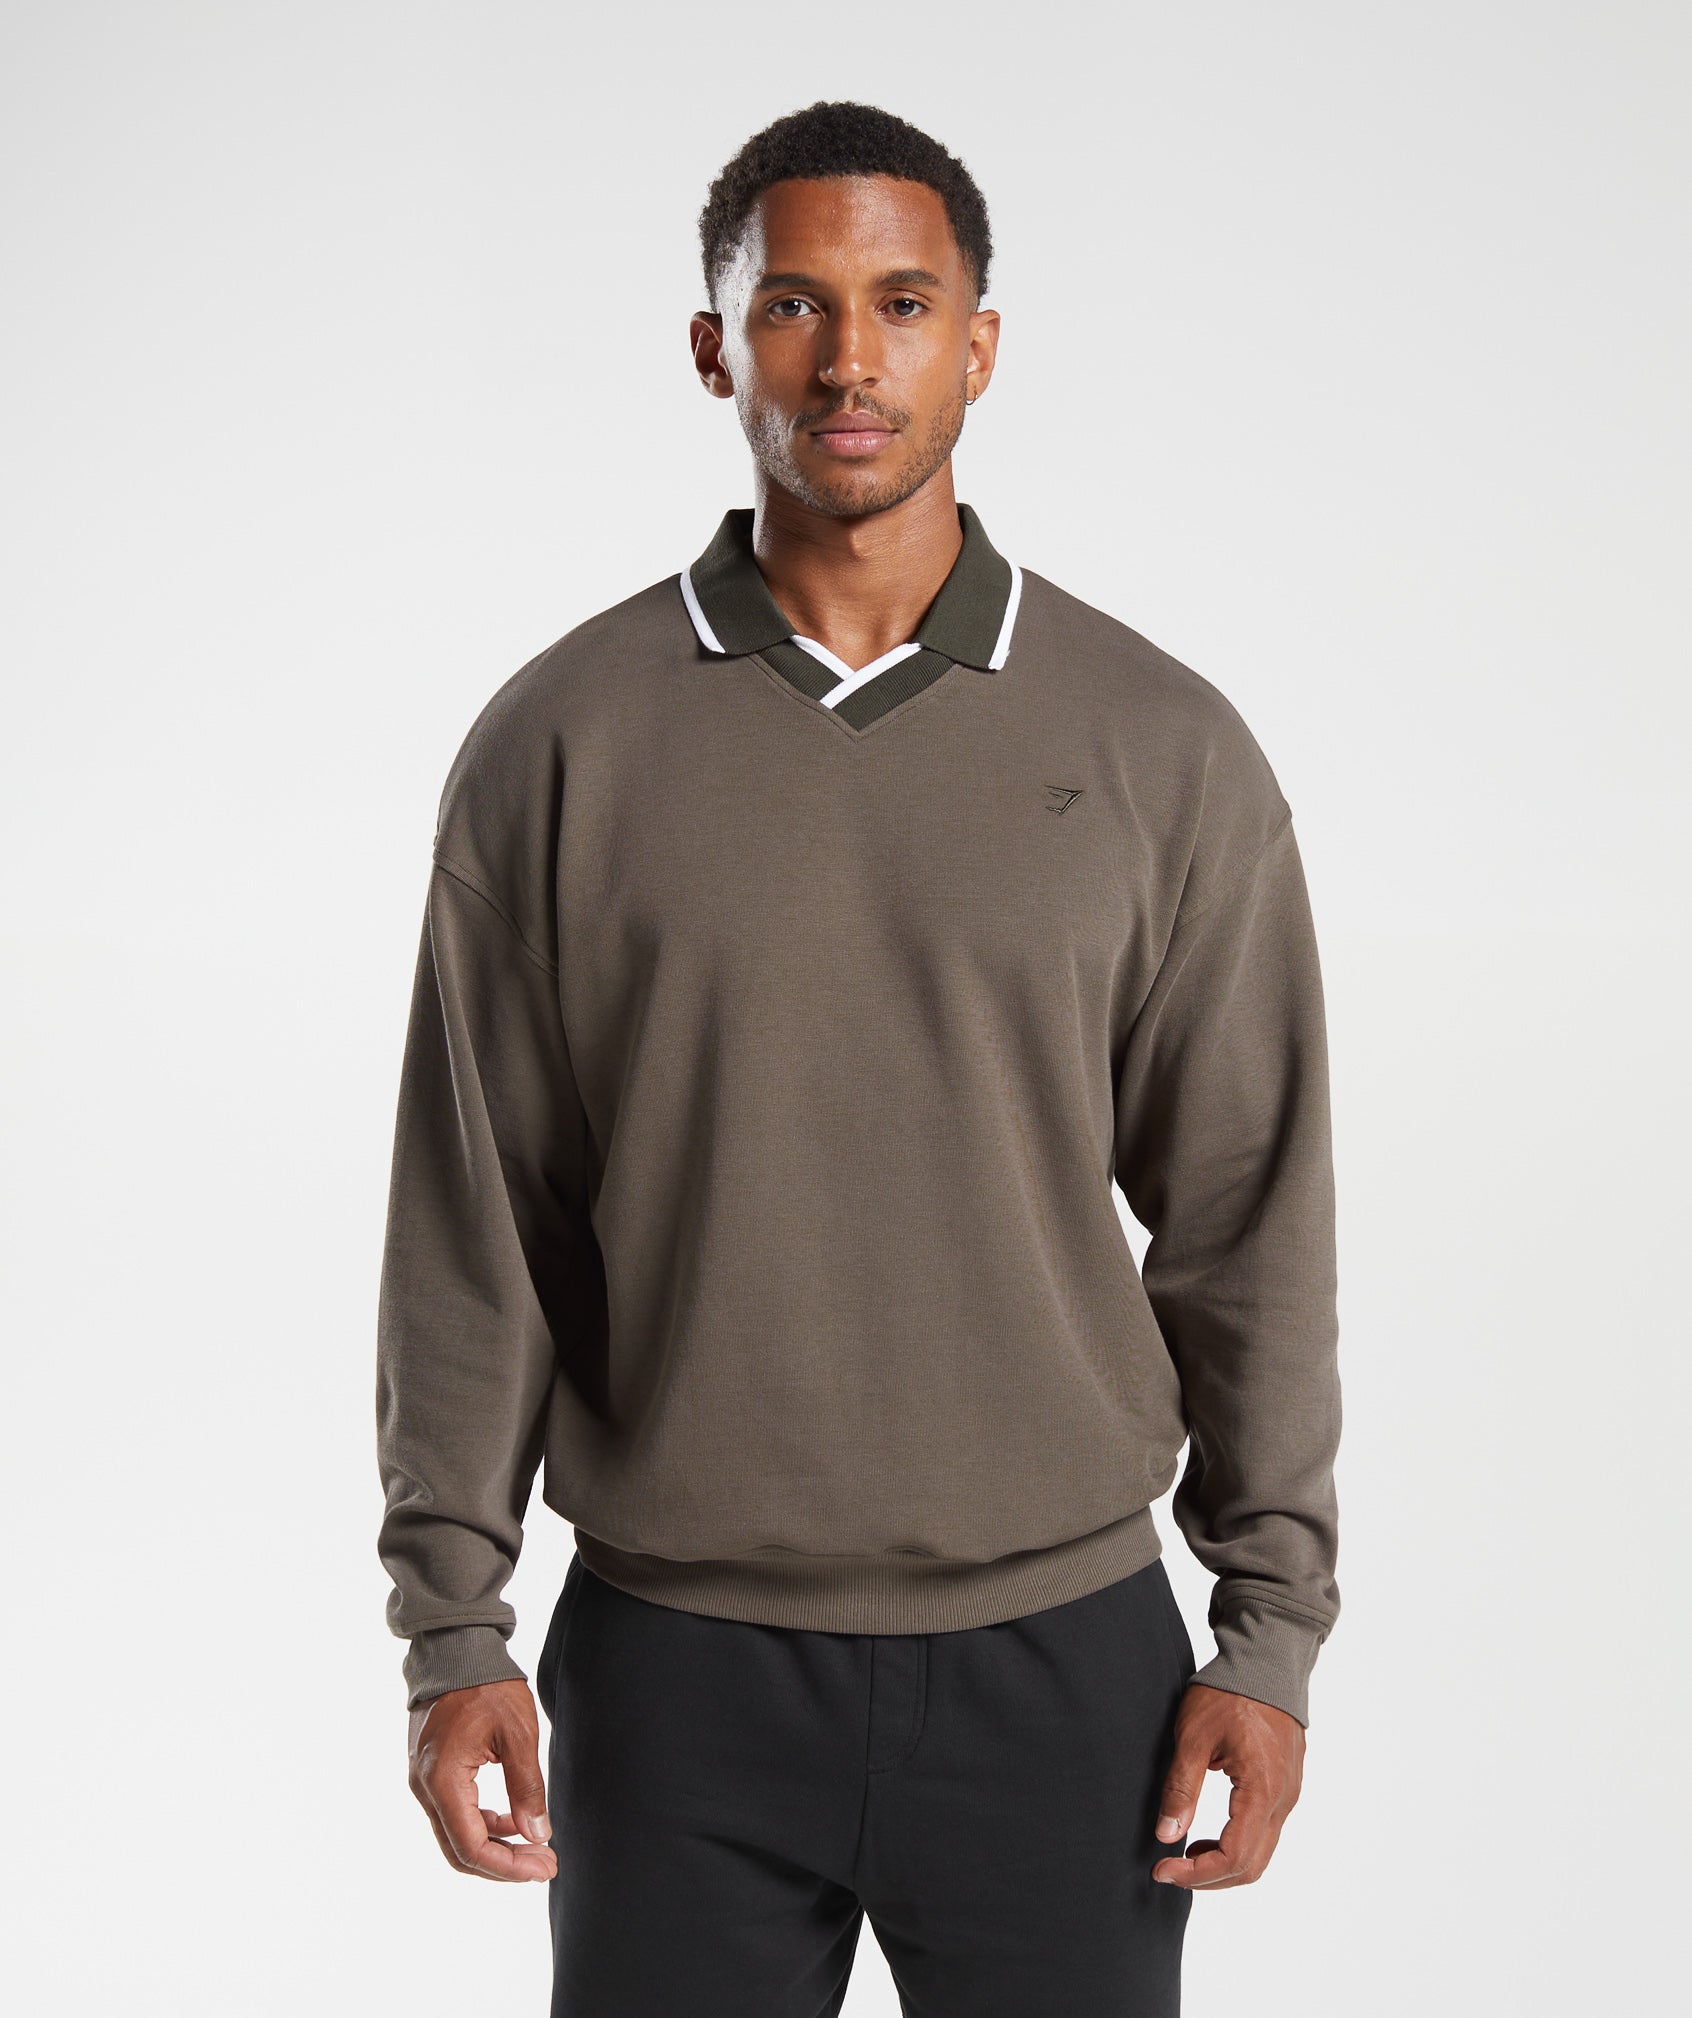 Rest Day Street Polo Pullover in Camo Brown - view 1